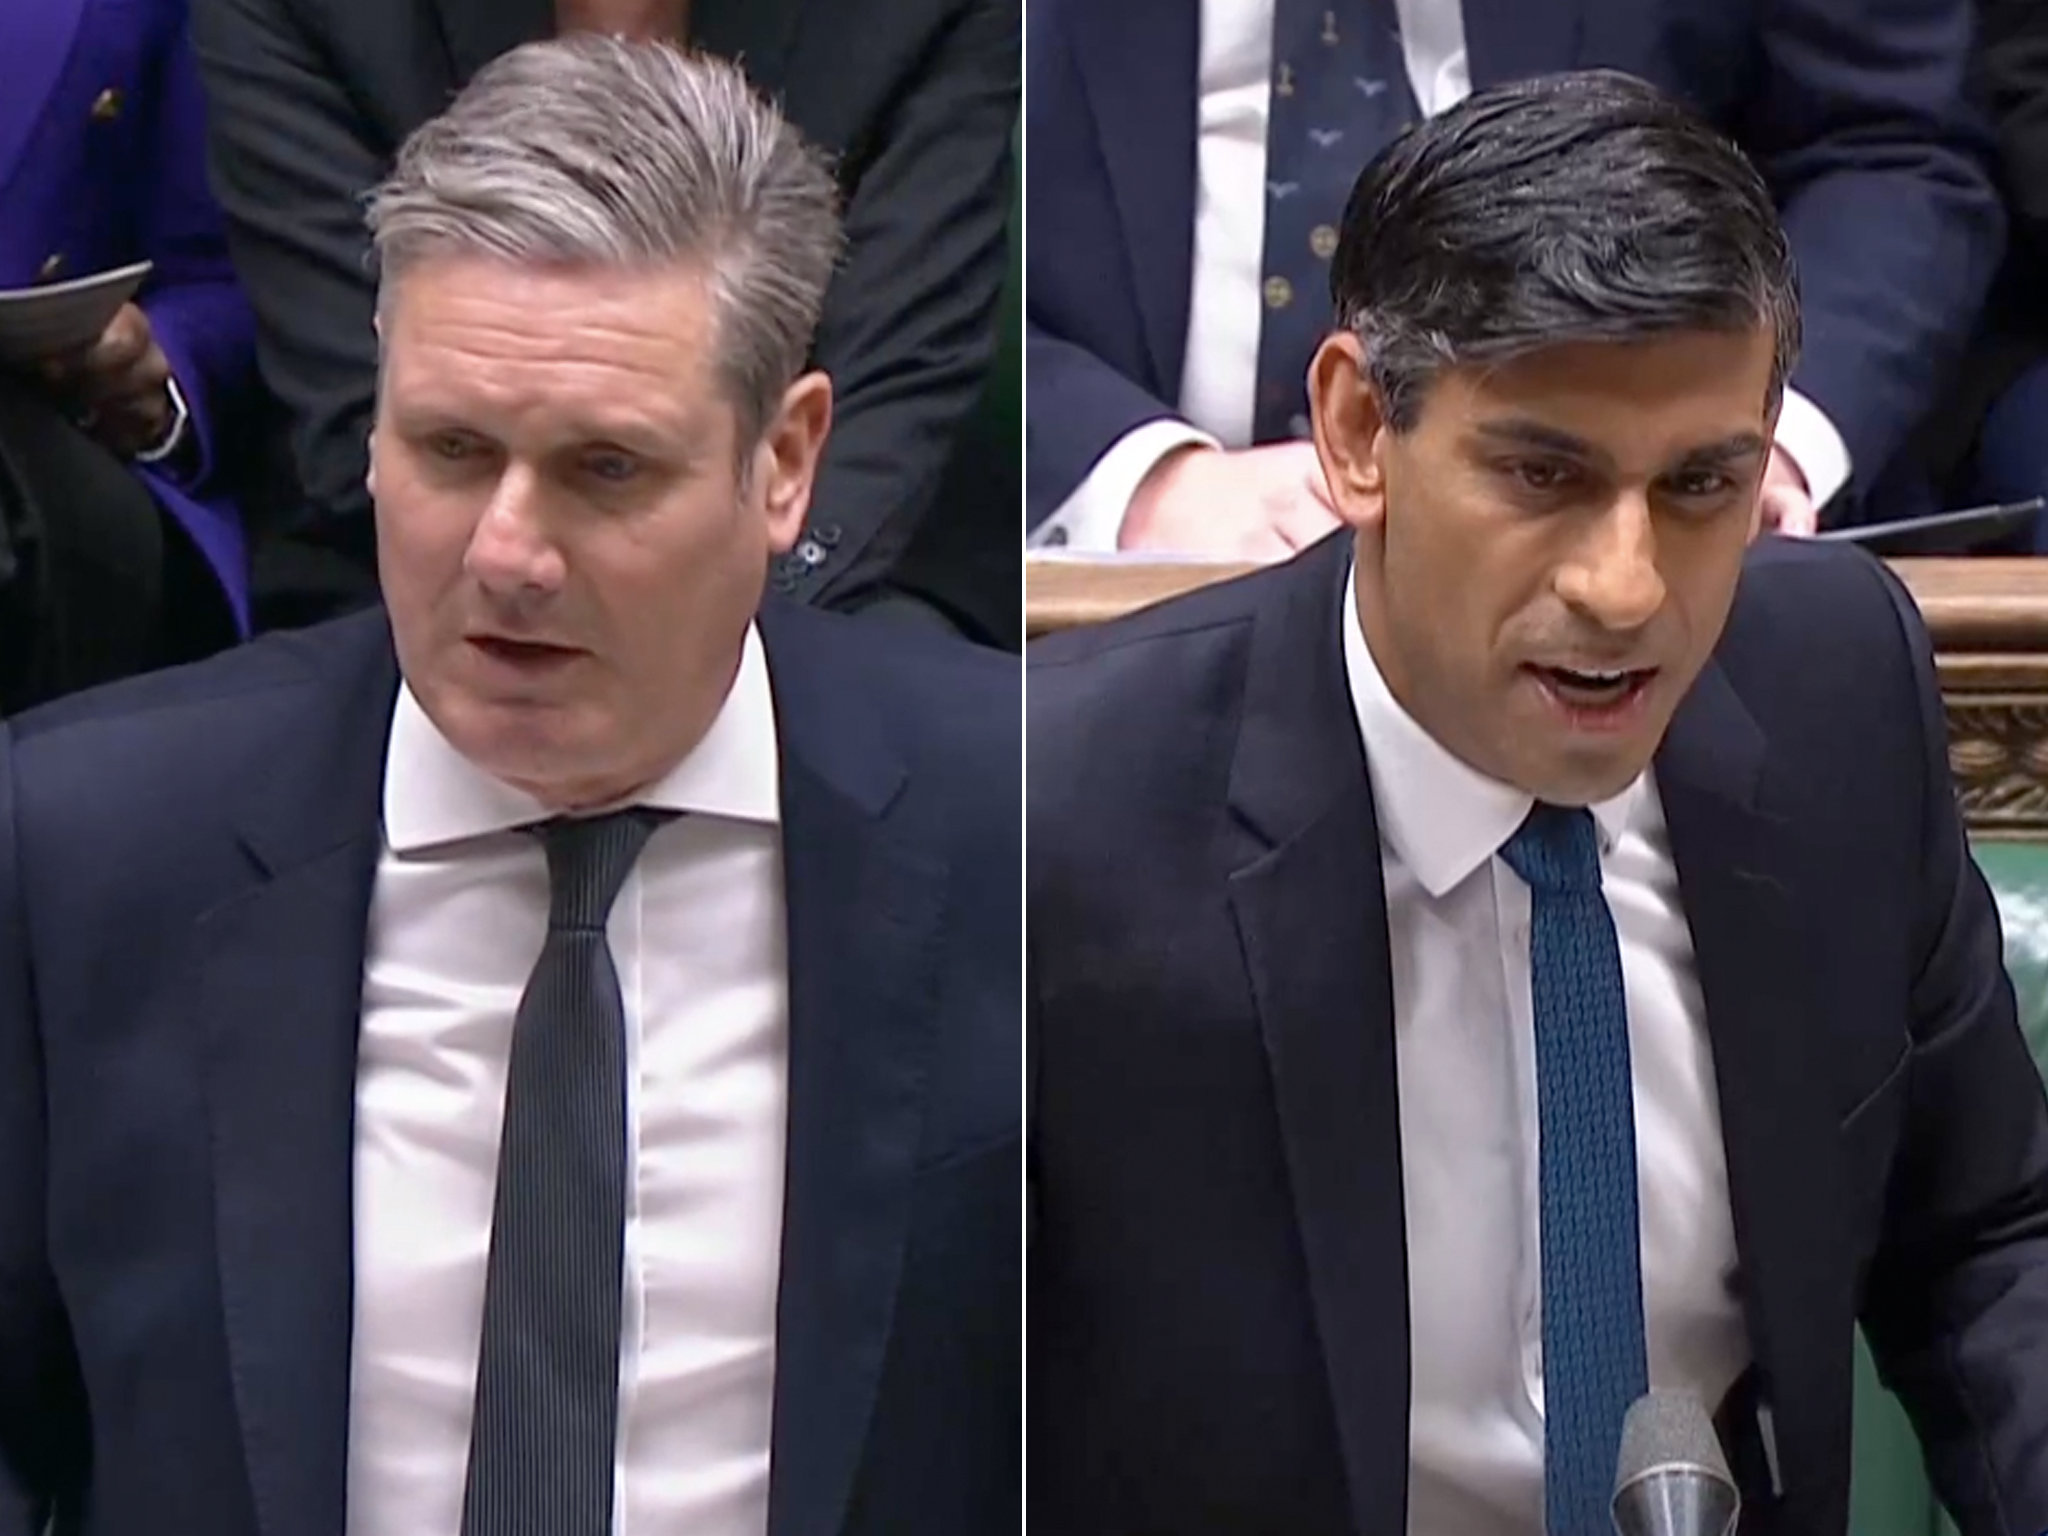 Starmer lectured the prime minister on the meaning of fiscal responsibility